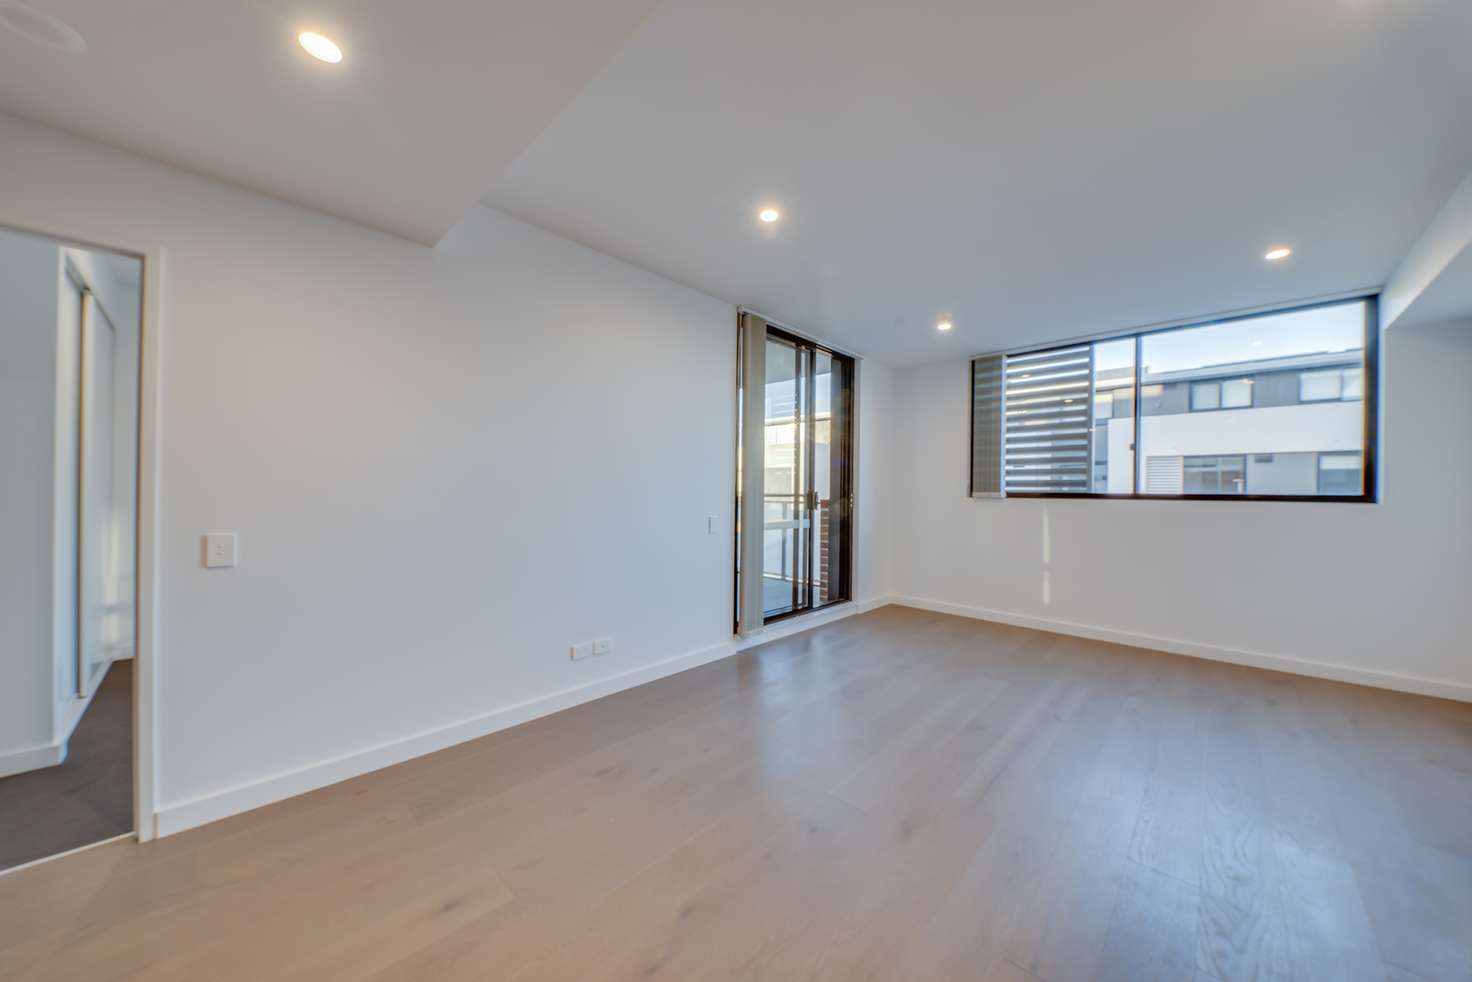 Main view of Homely apartment listing, 1.504/18 Hannah Street, Beecroft NSW 2119